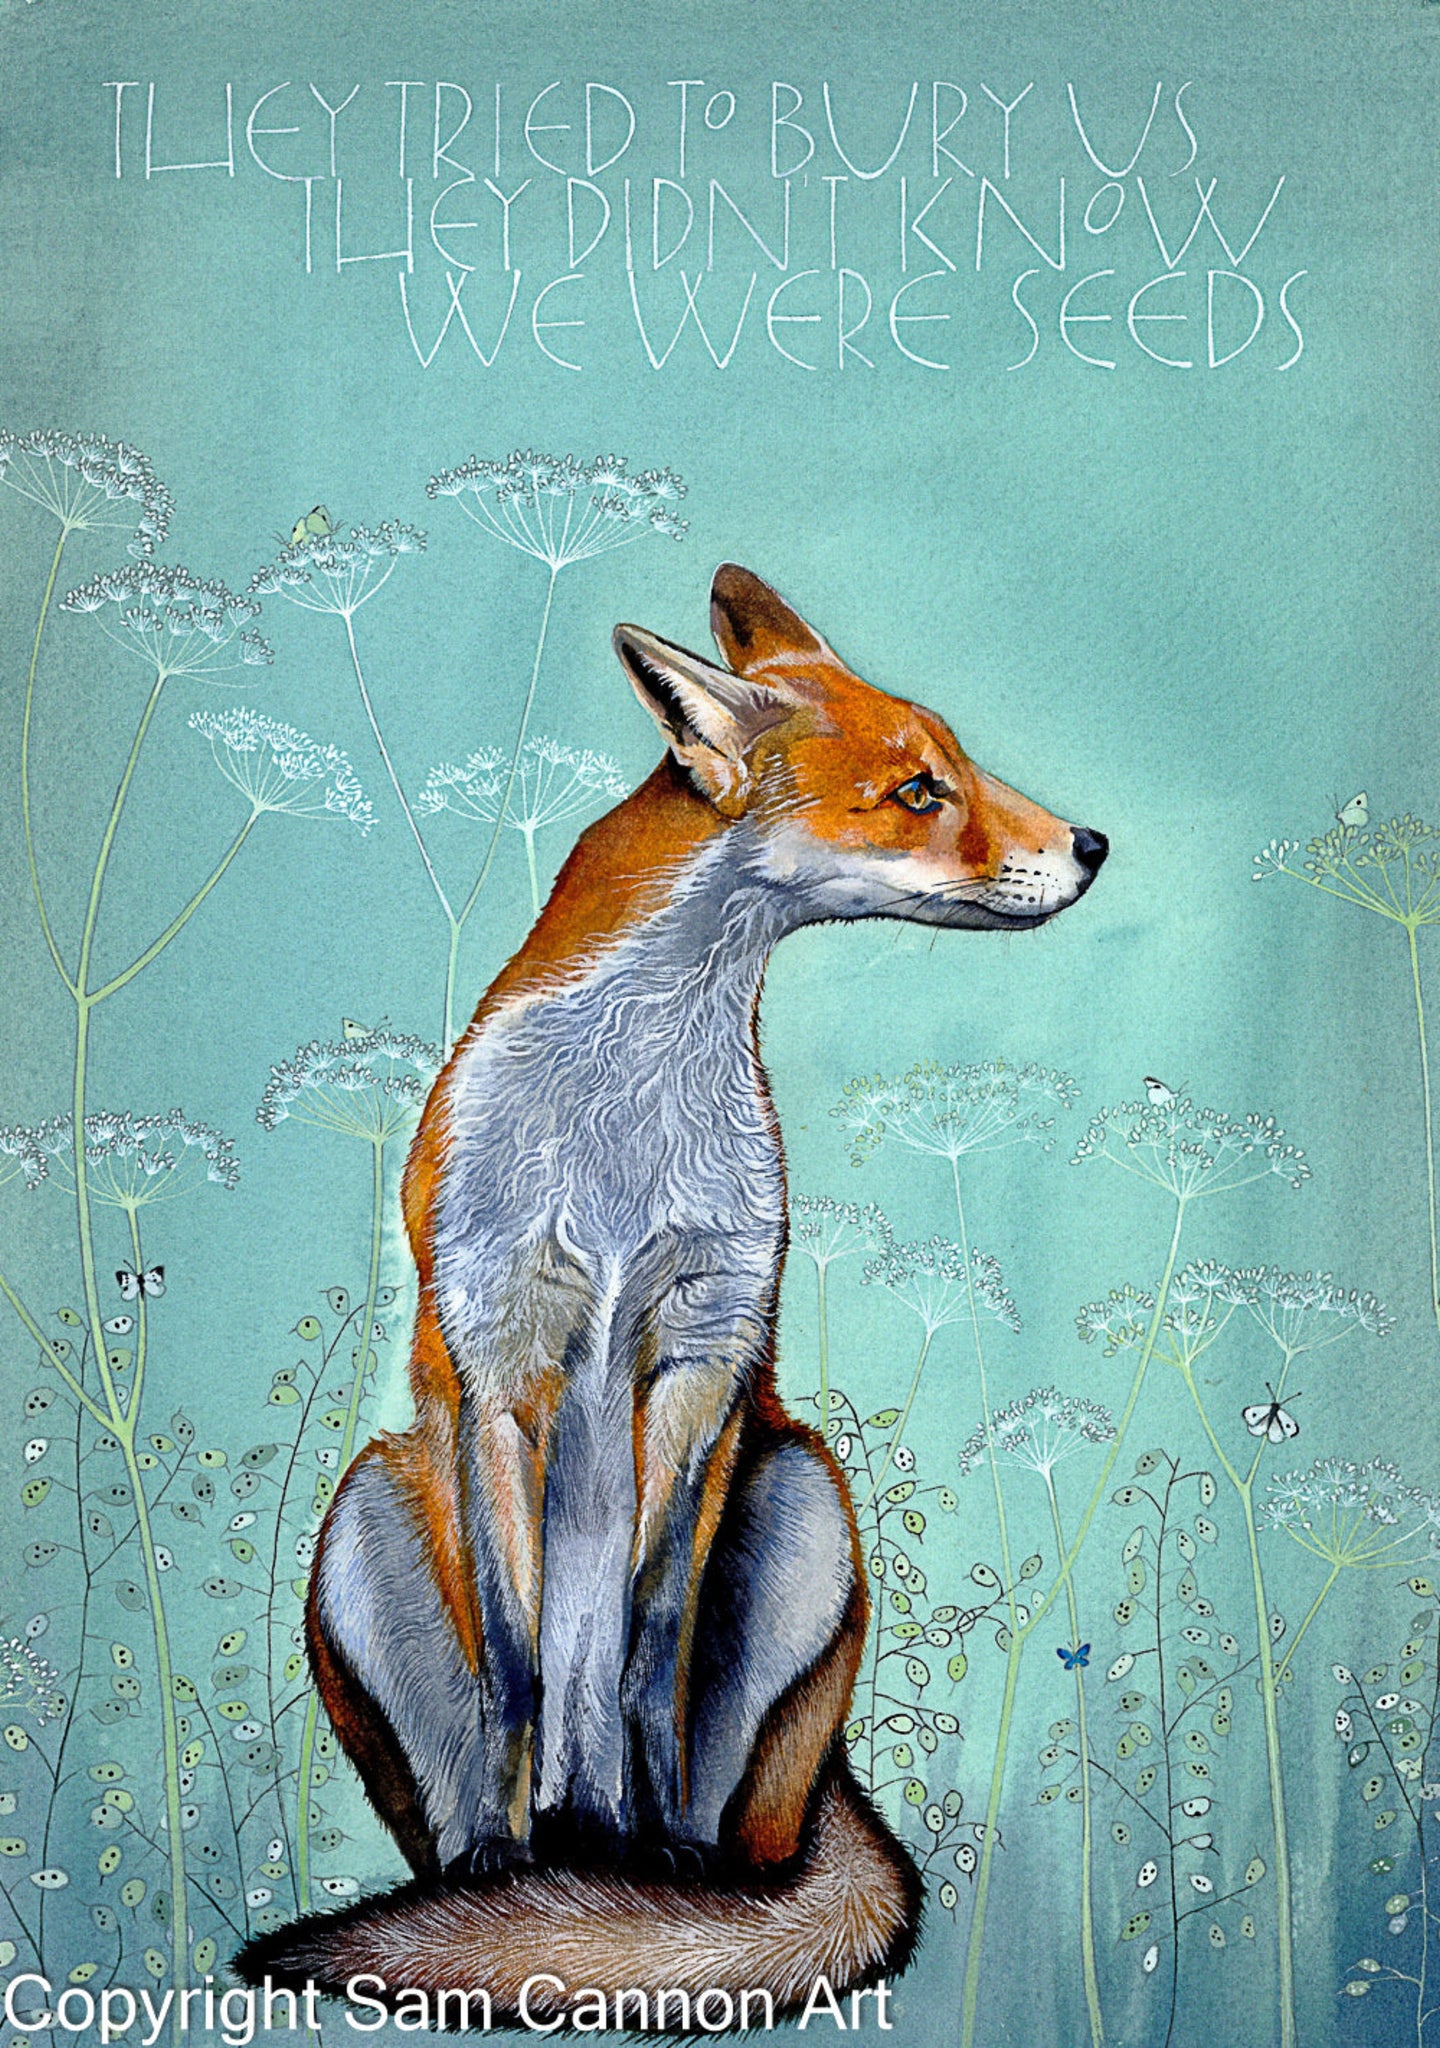 Sam Cannon They Didn't Know We were Seeds Greeting Card with fox